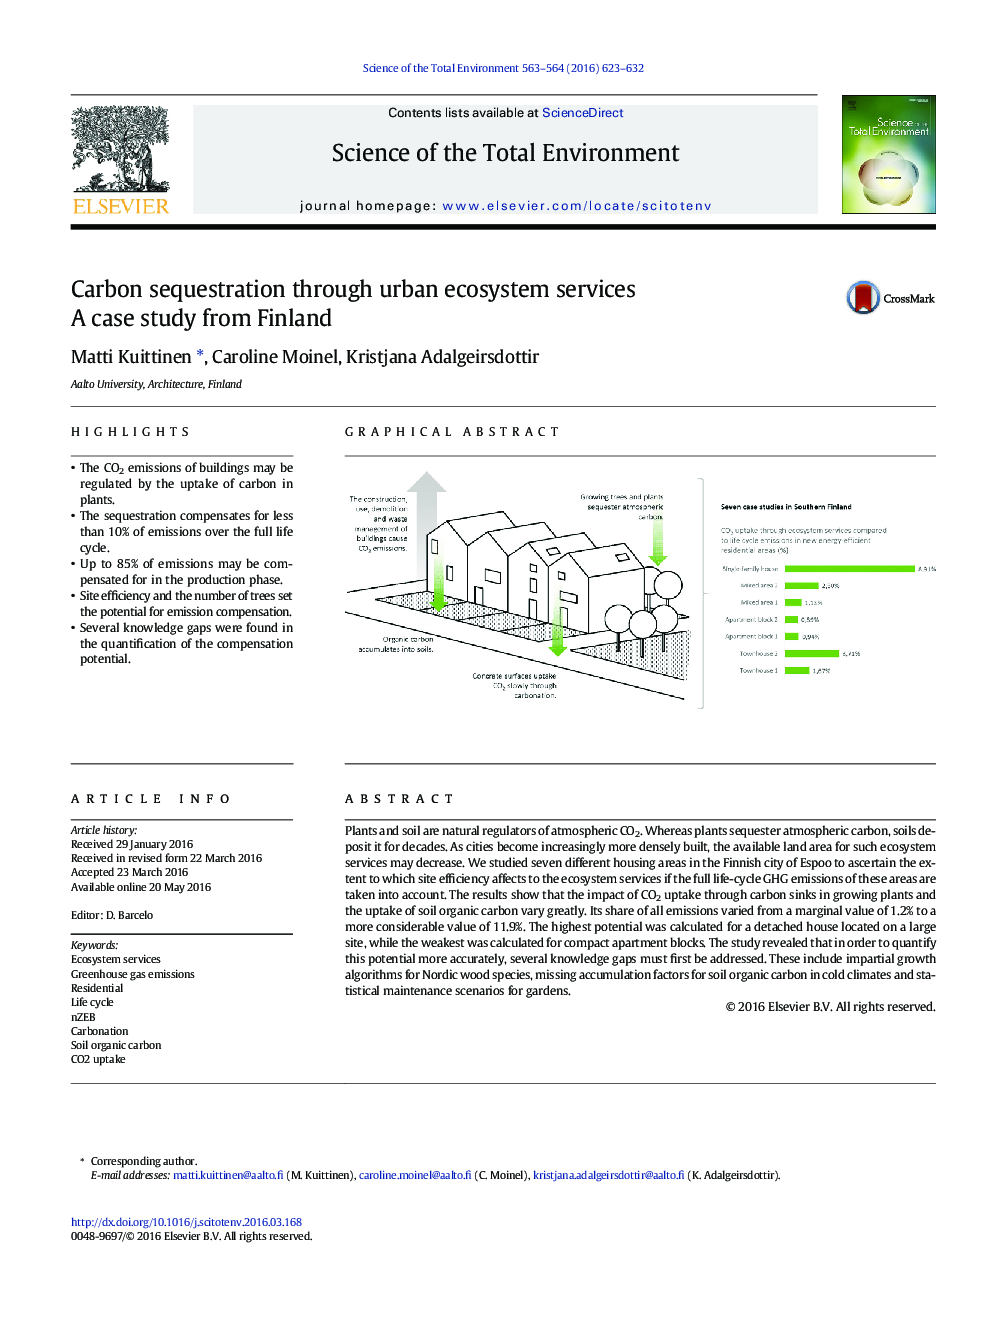 Carbon sequestration through urban ecosystem services: A case study from Finland